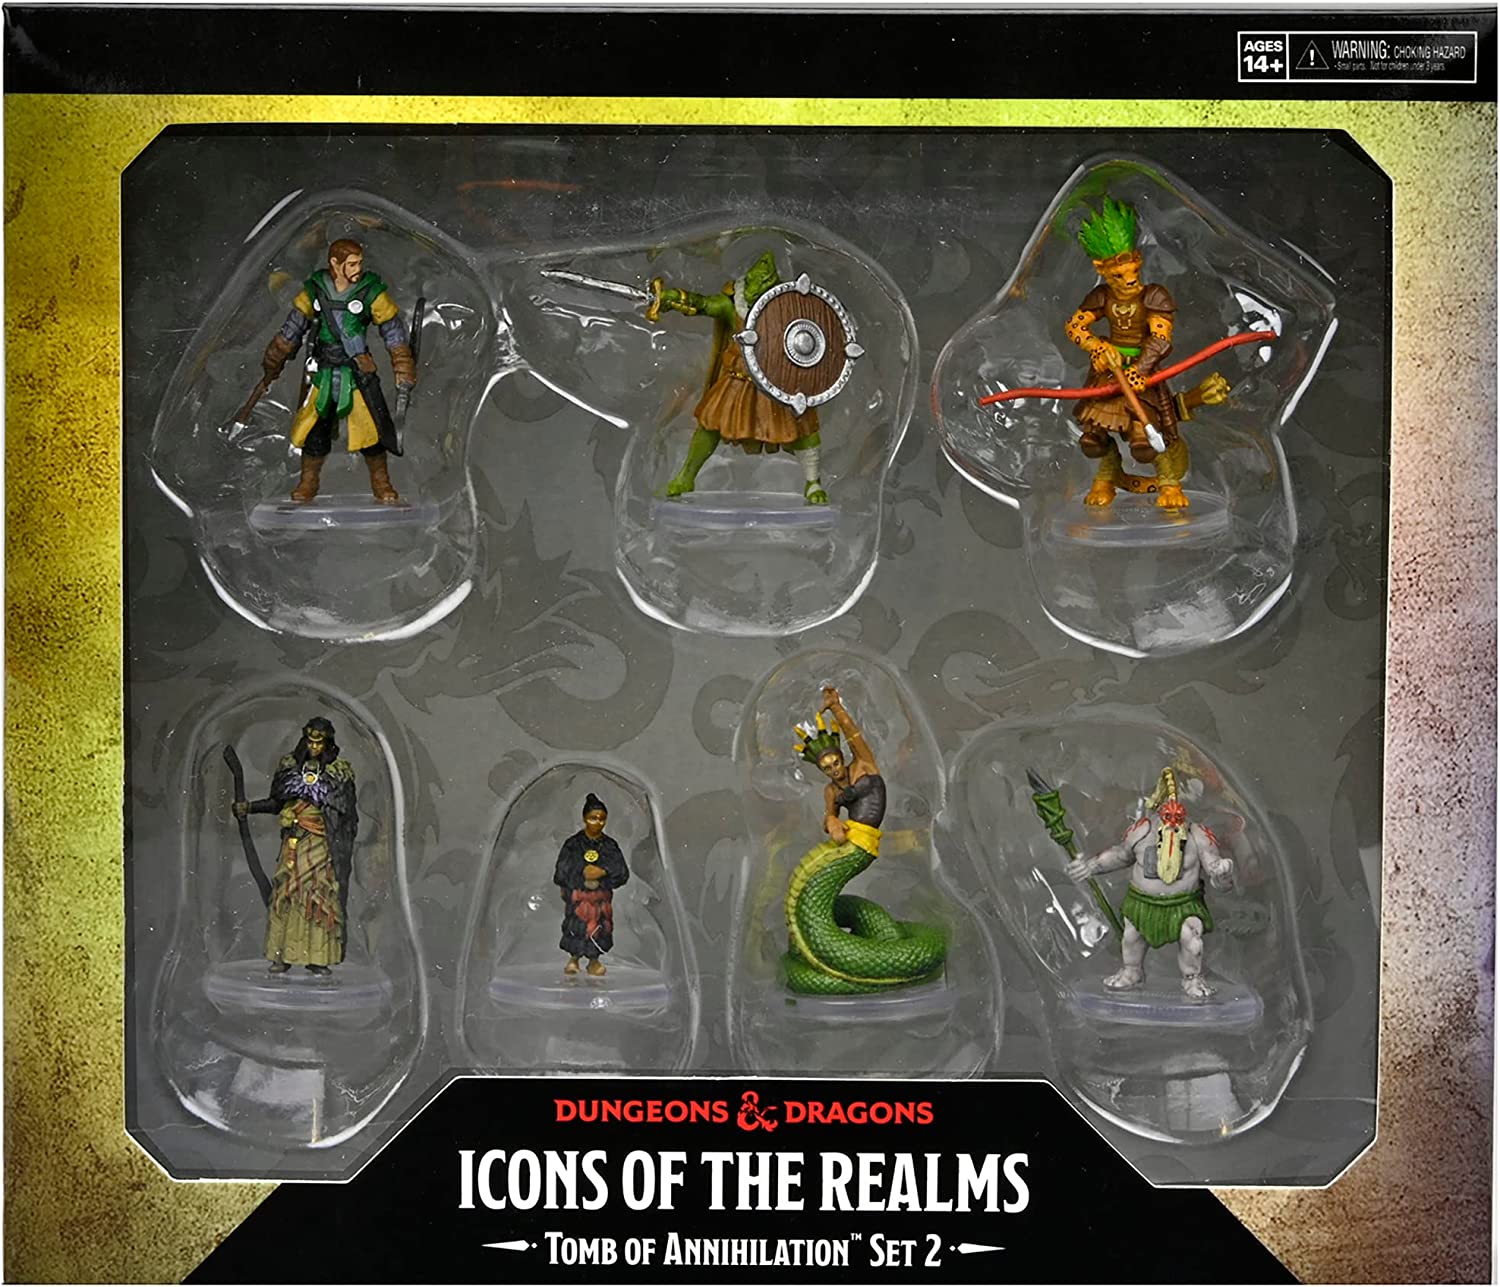 D&D Icons of the Realms - Tomb of Annihilation Set 2